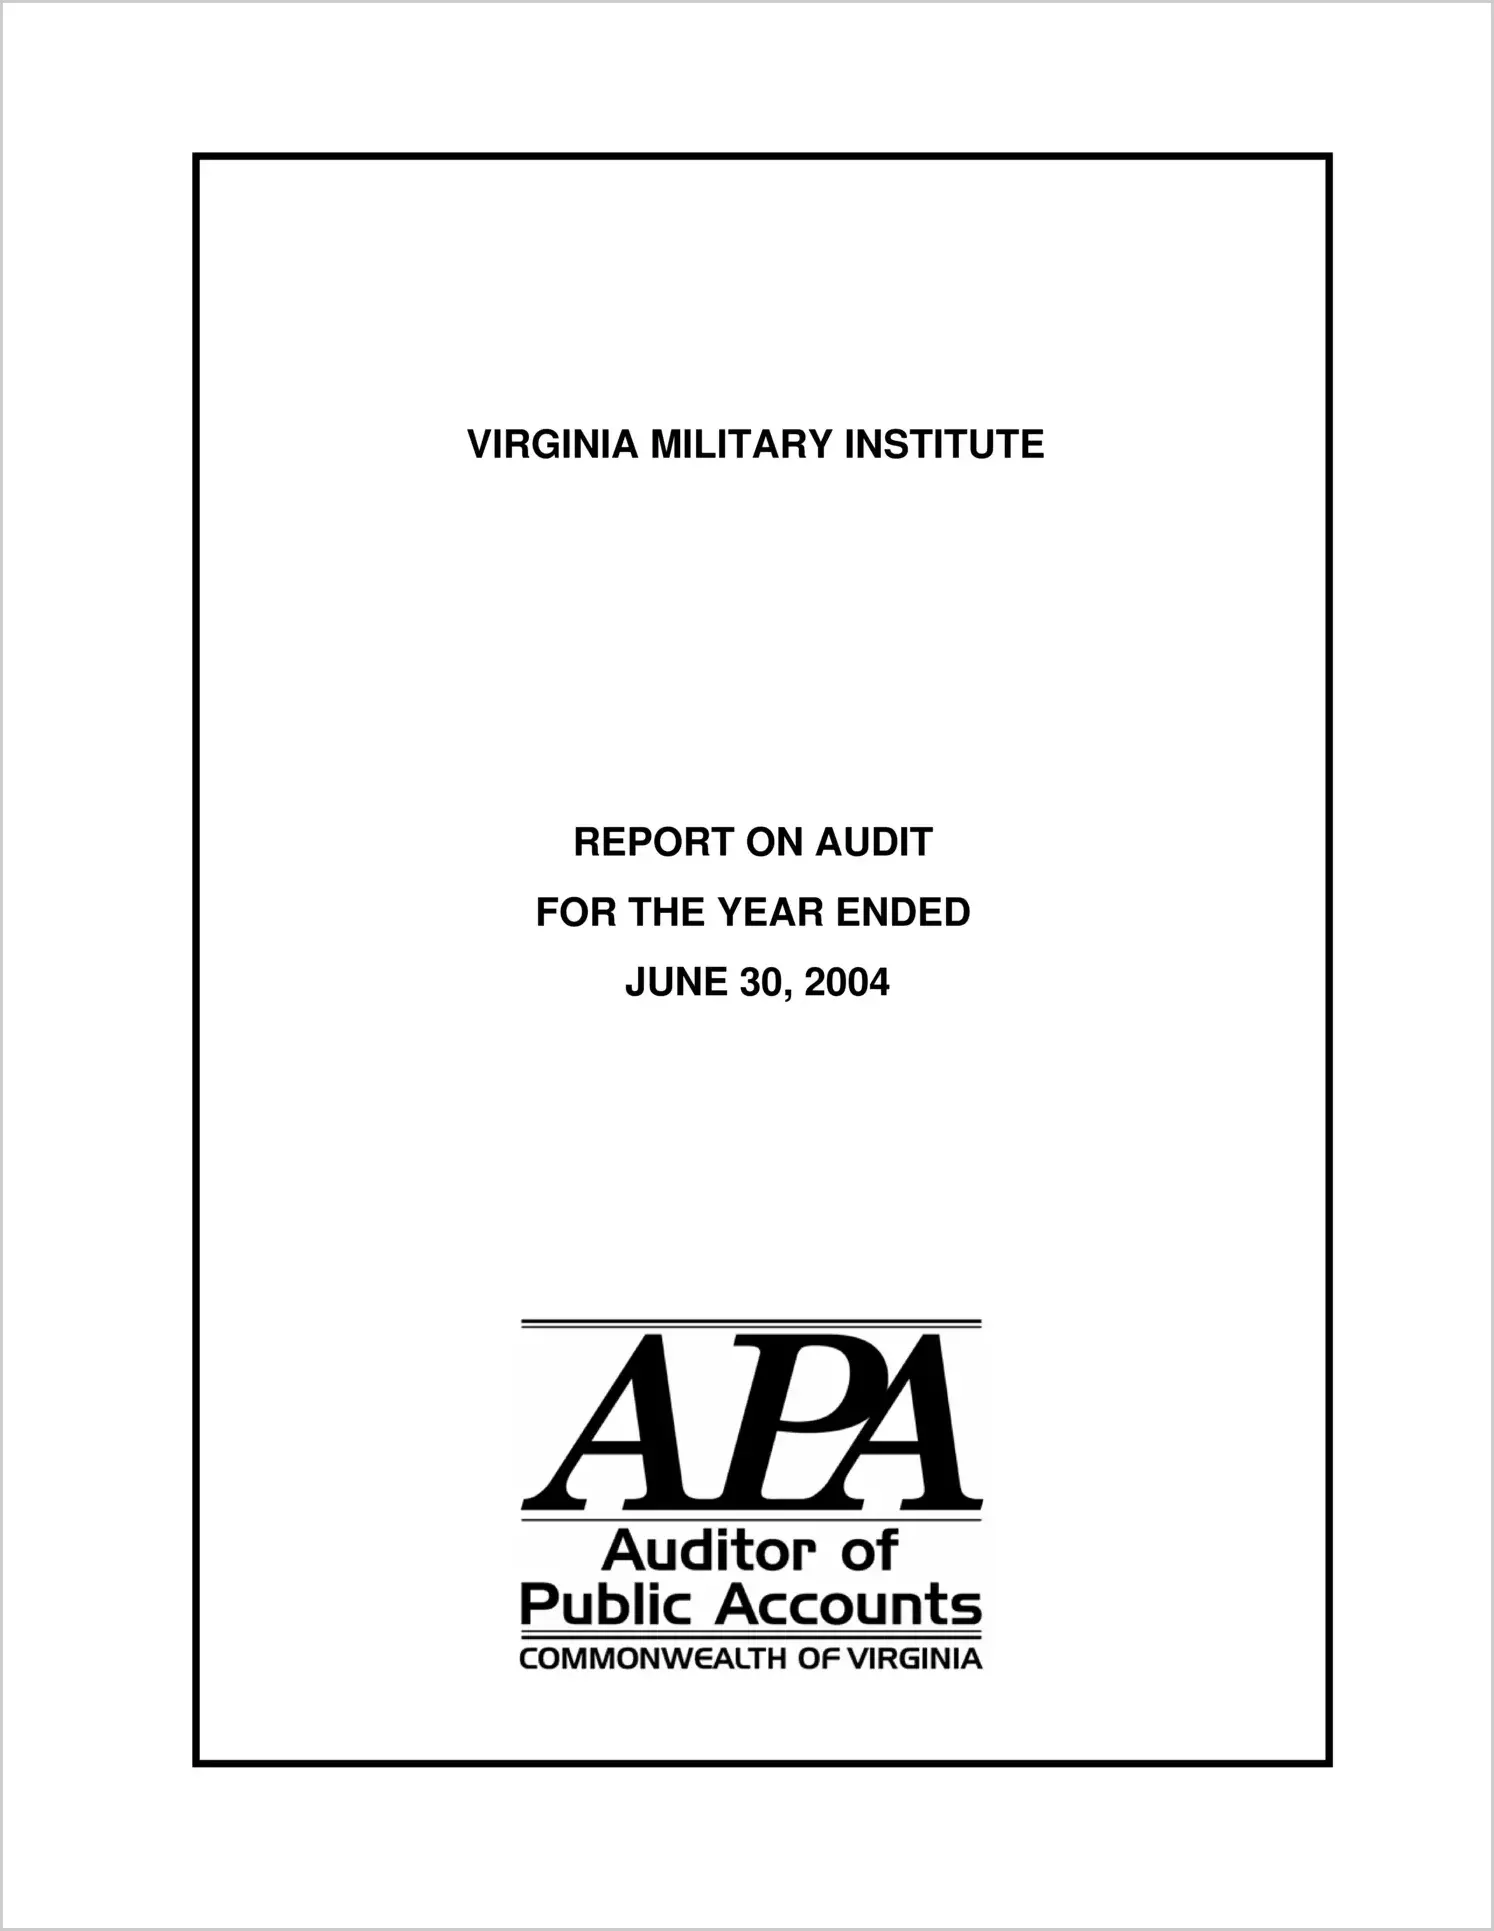 Virginia Military Institute for the year ended June 30, 2004